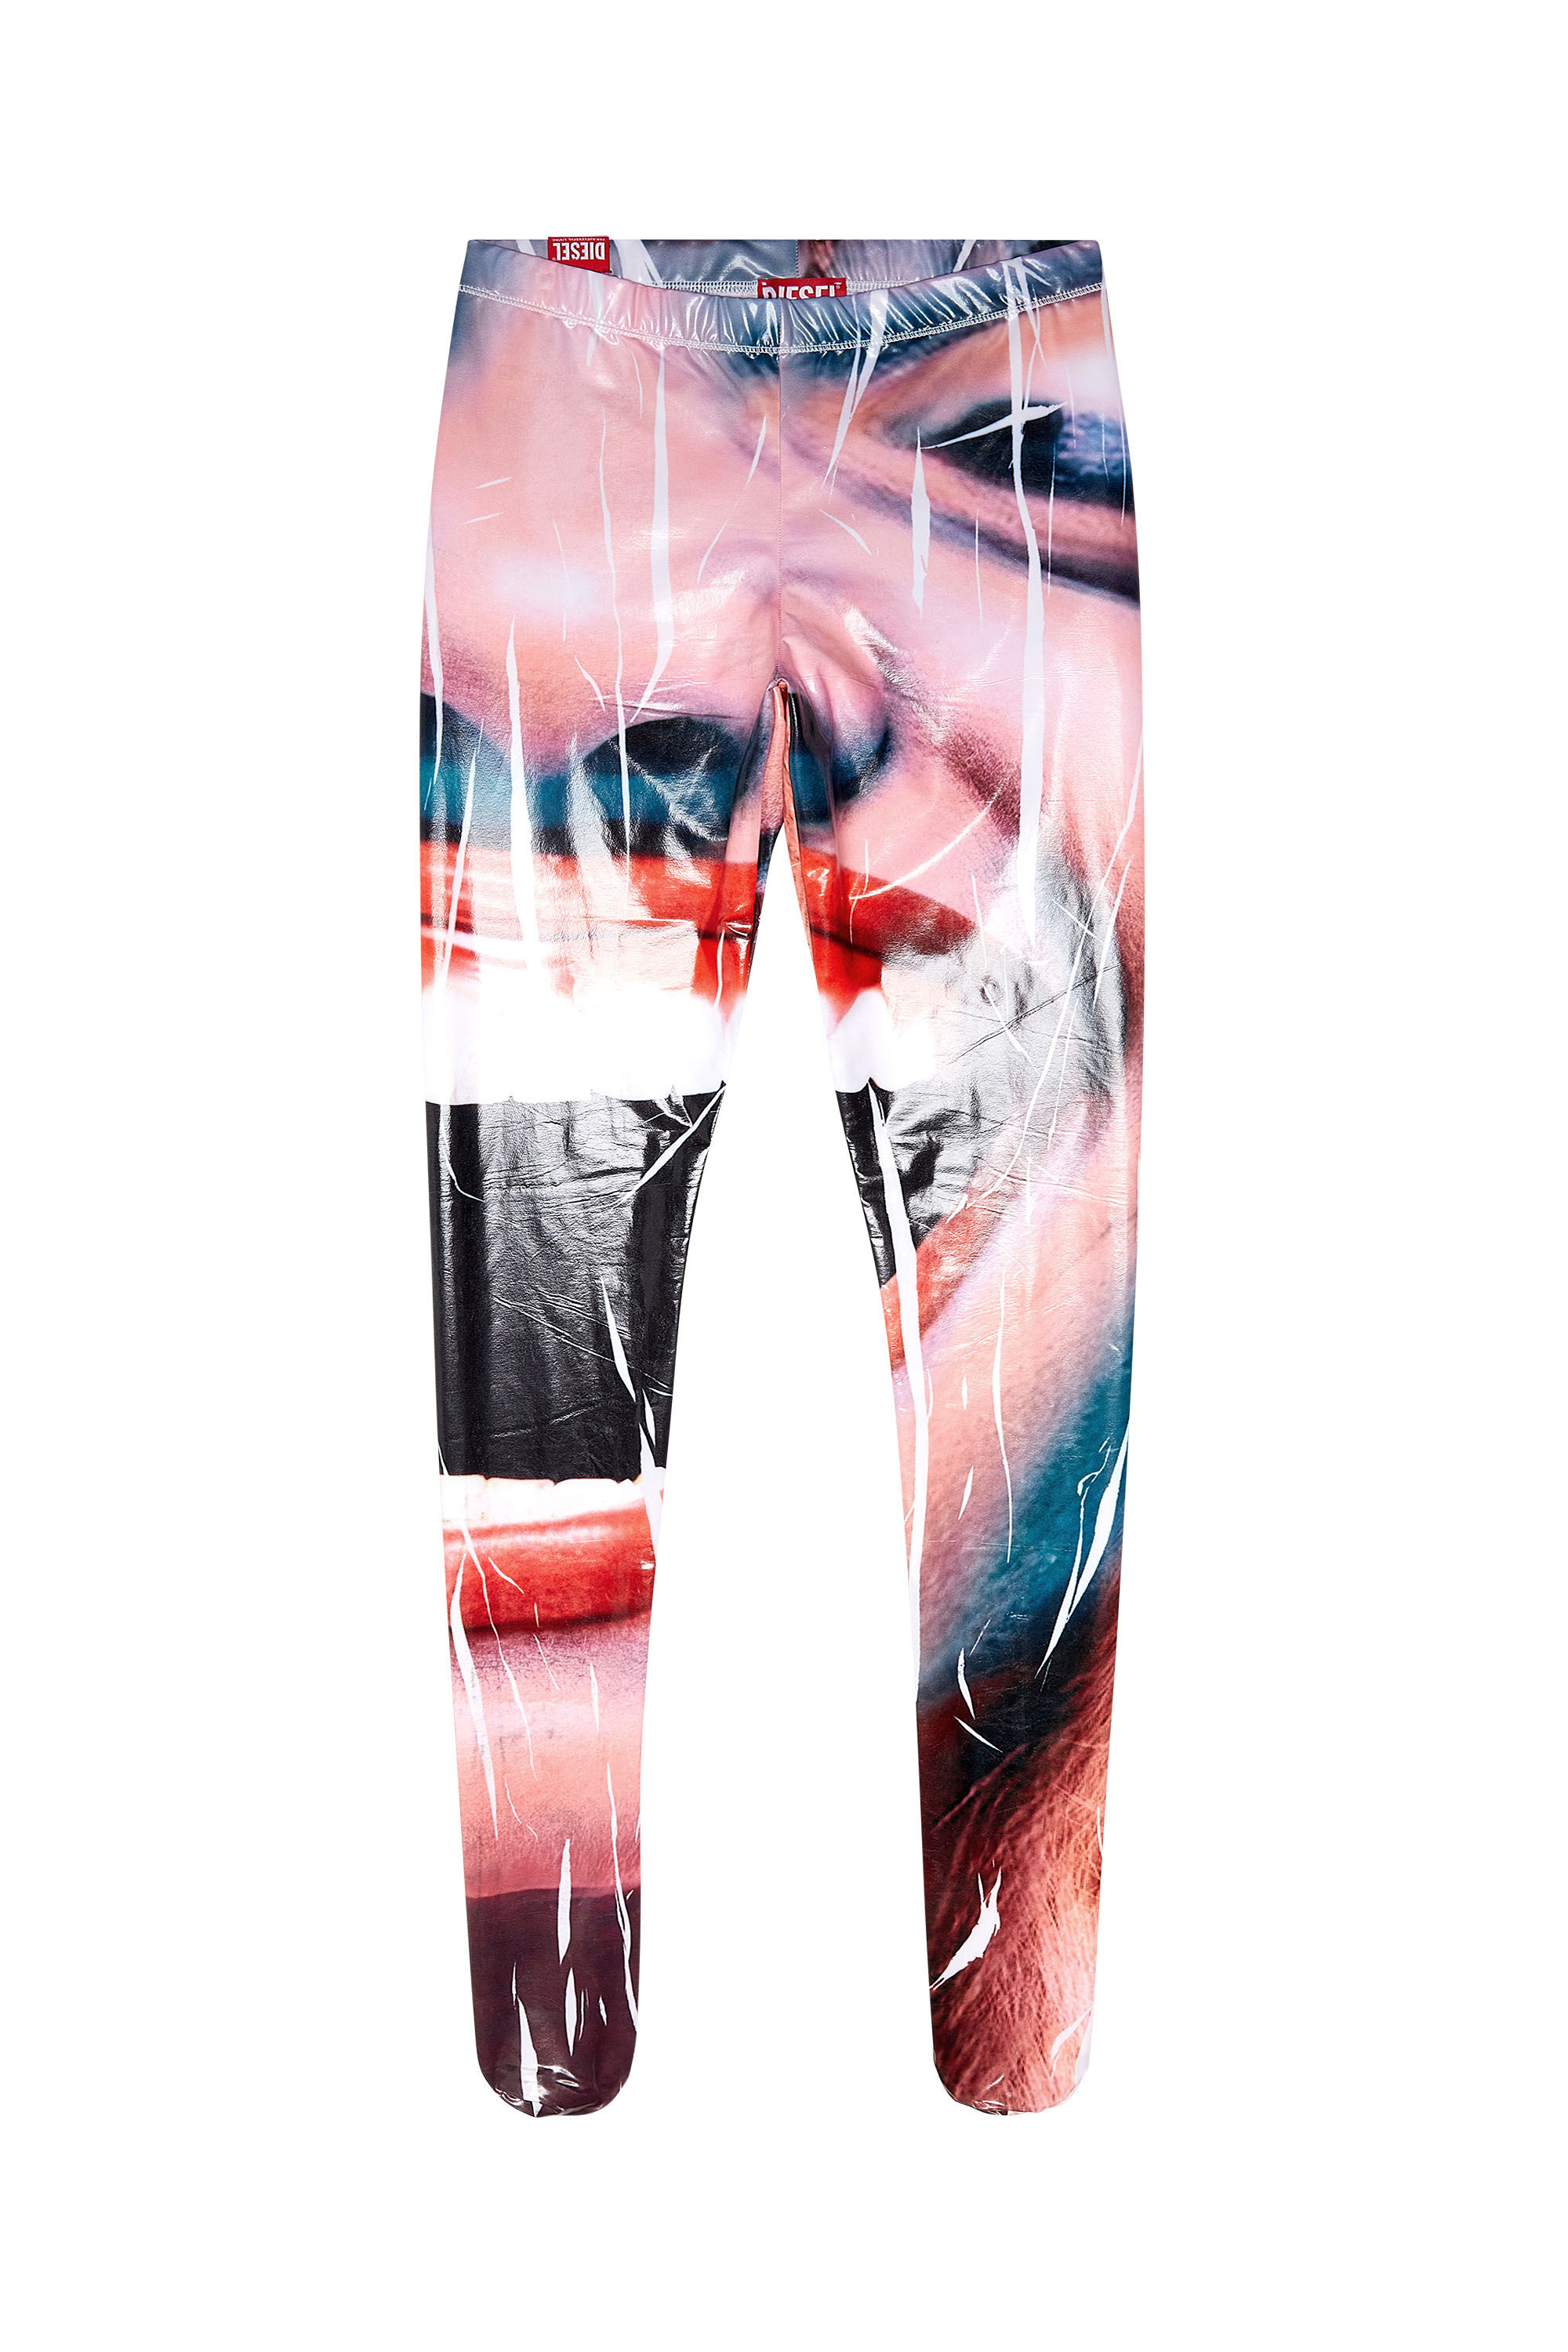 Women's Tights with close-up face print